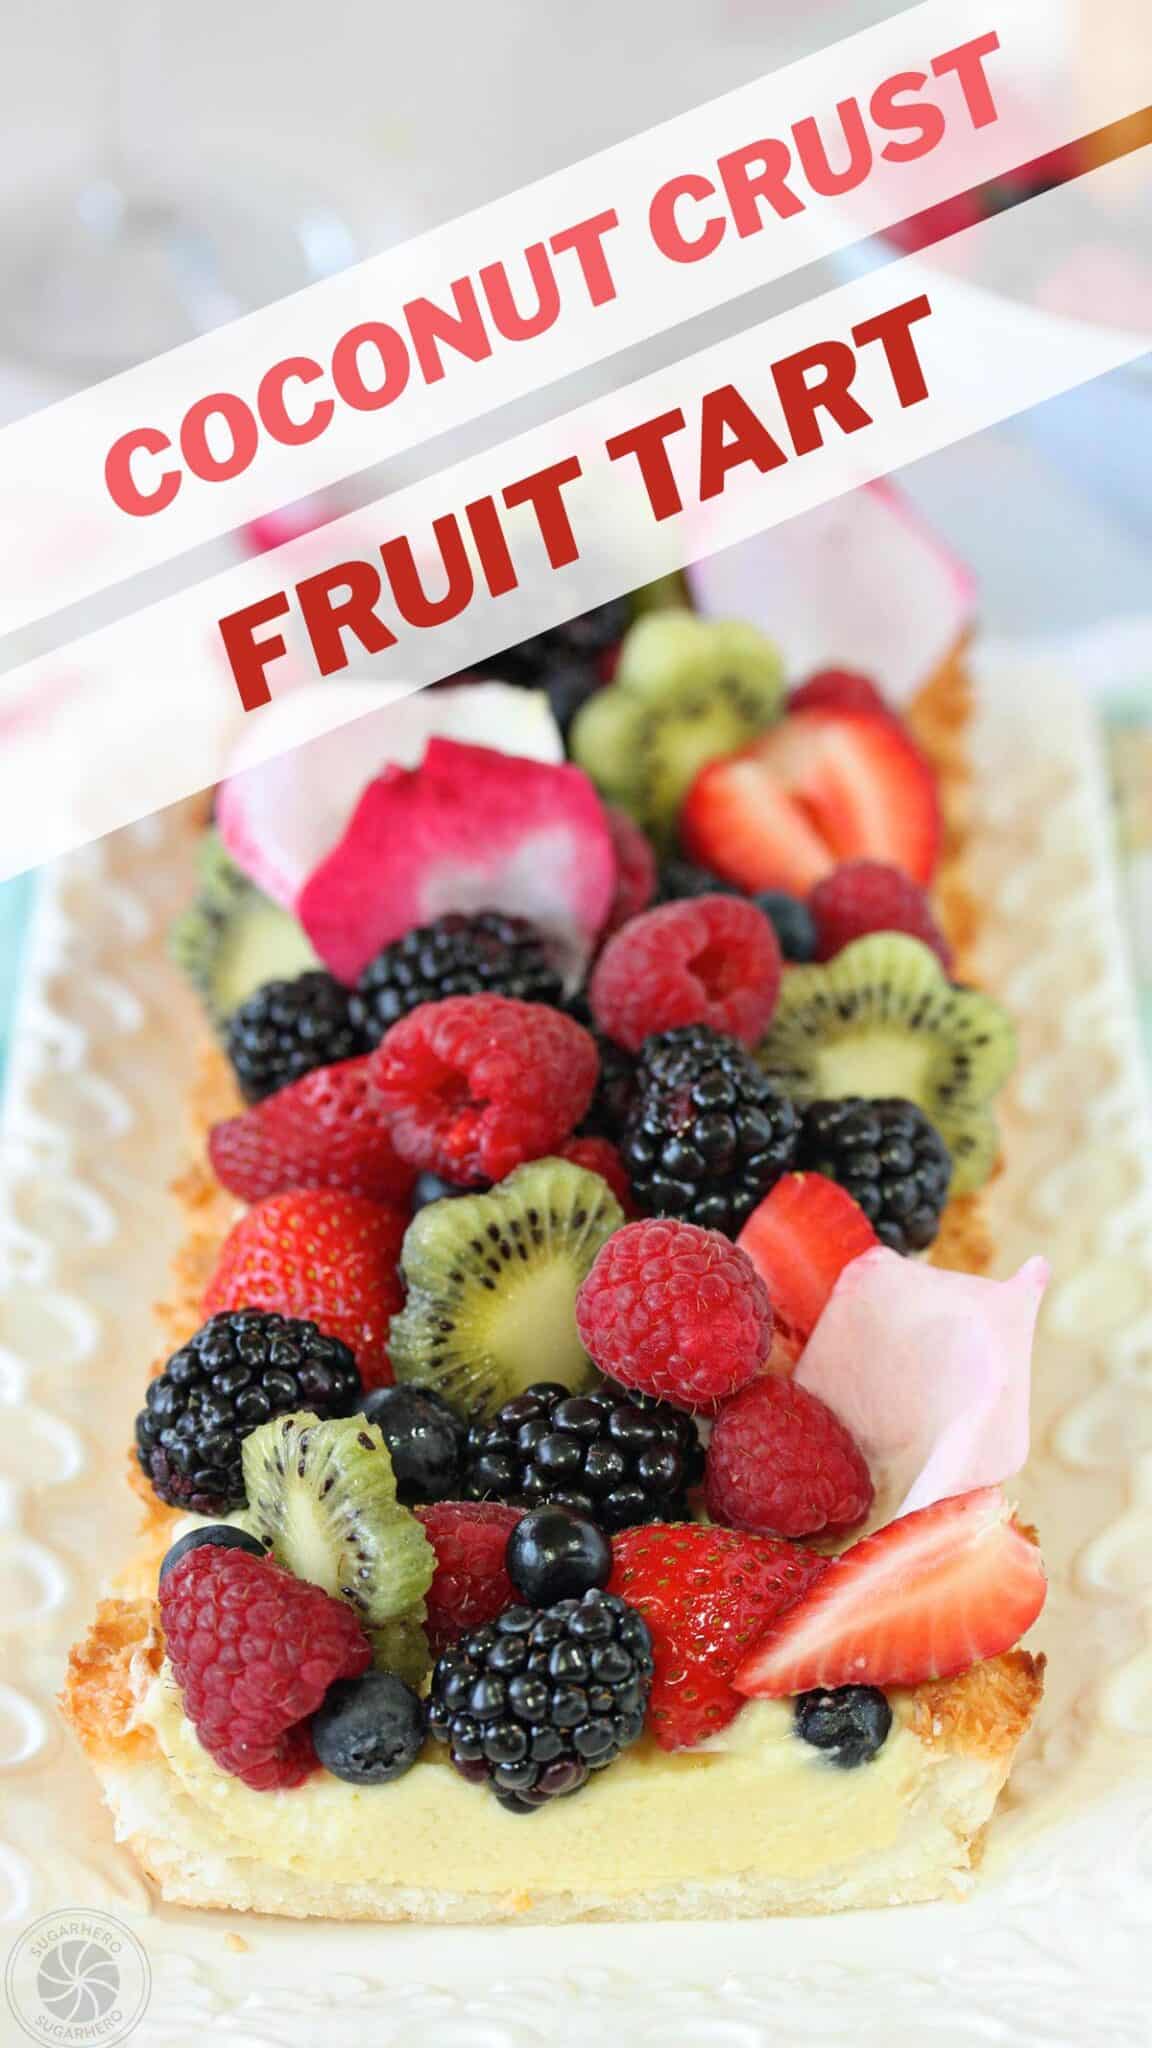 Image of Coconut Macaroon Tart with text overlay for Pinterest.